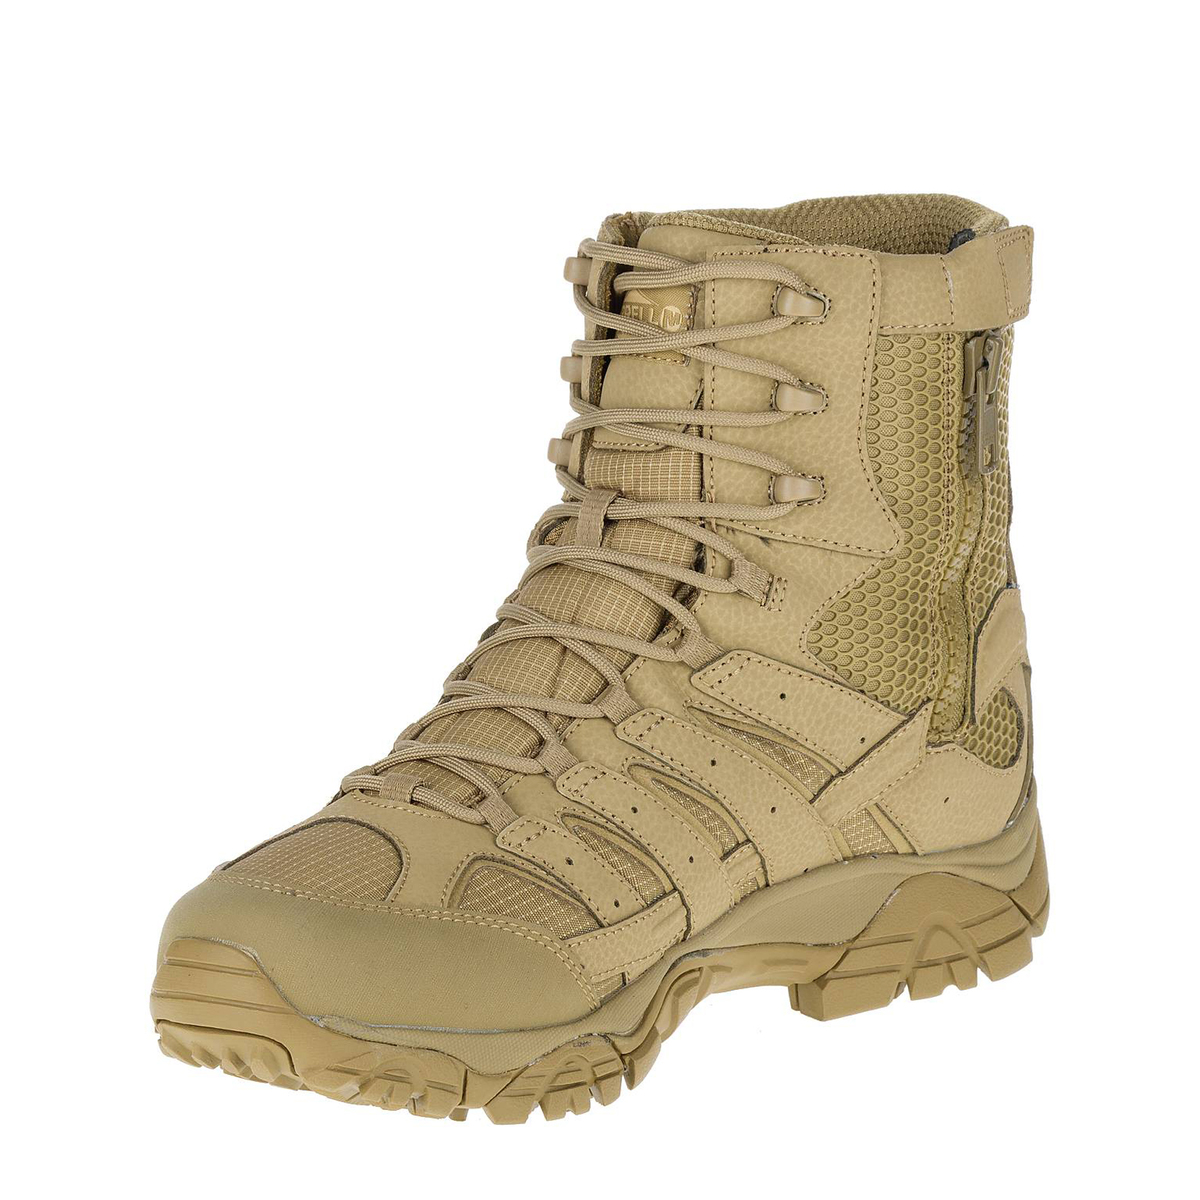 Outdoor Tactical | Merrell Tactical Moab 2 8inch Tactical WP Boots - Coyote